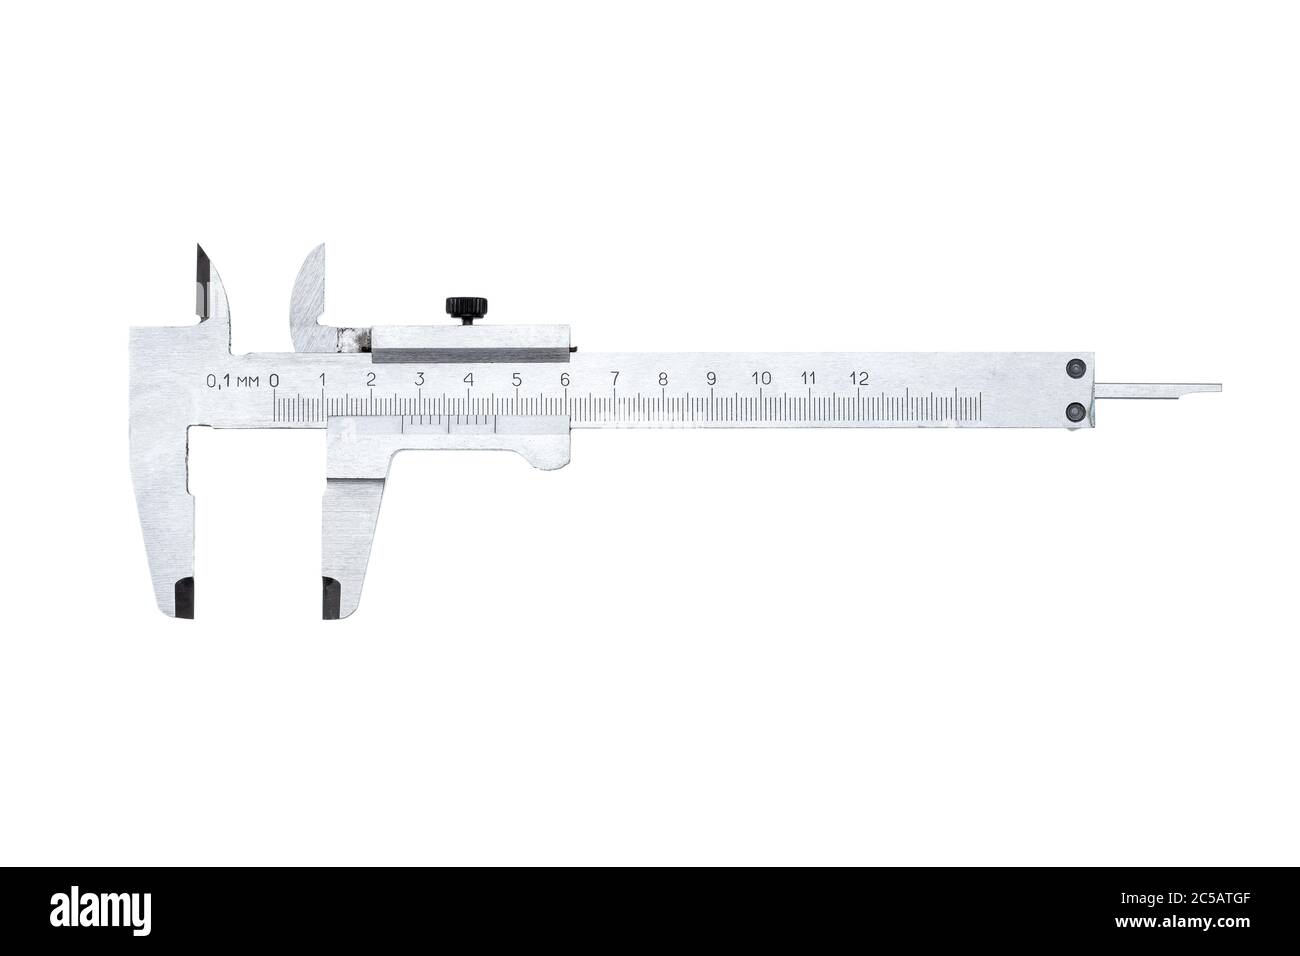 vernier caliper technical tool for measuring sizes, isolated on a white background. Stock Photo